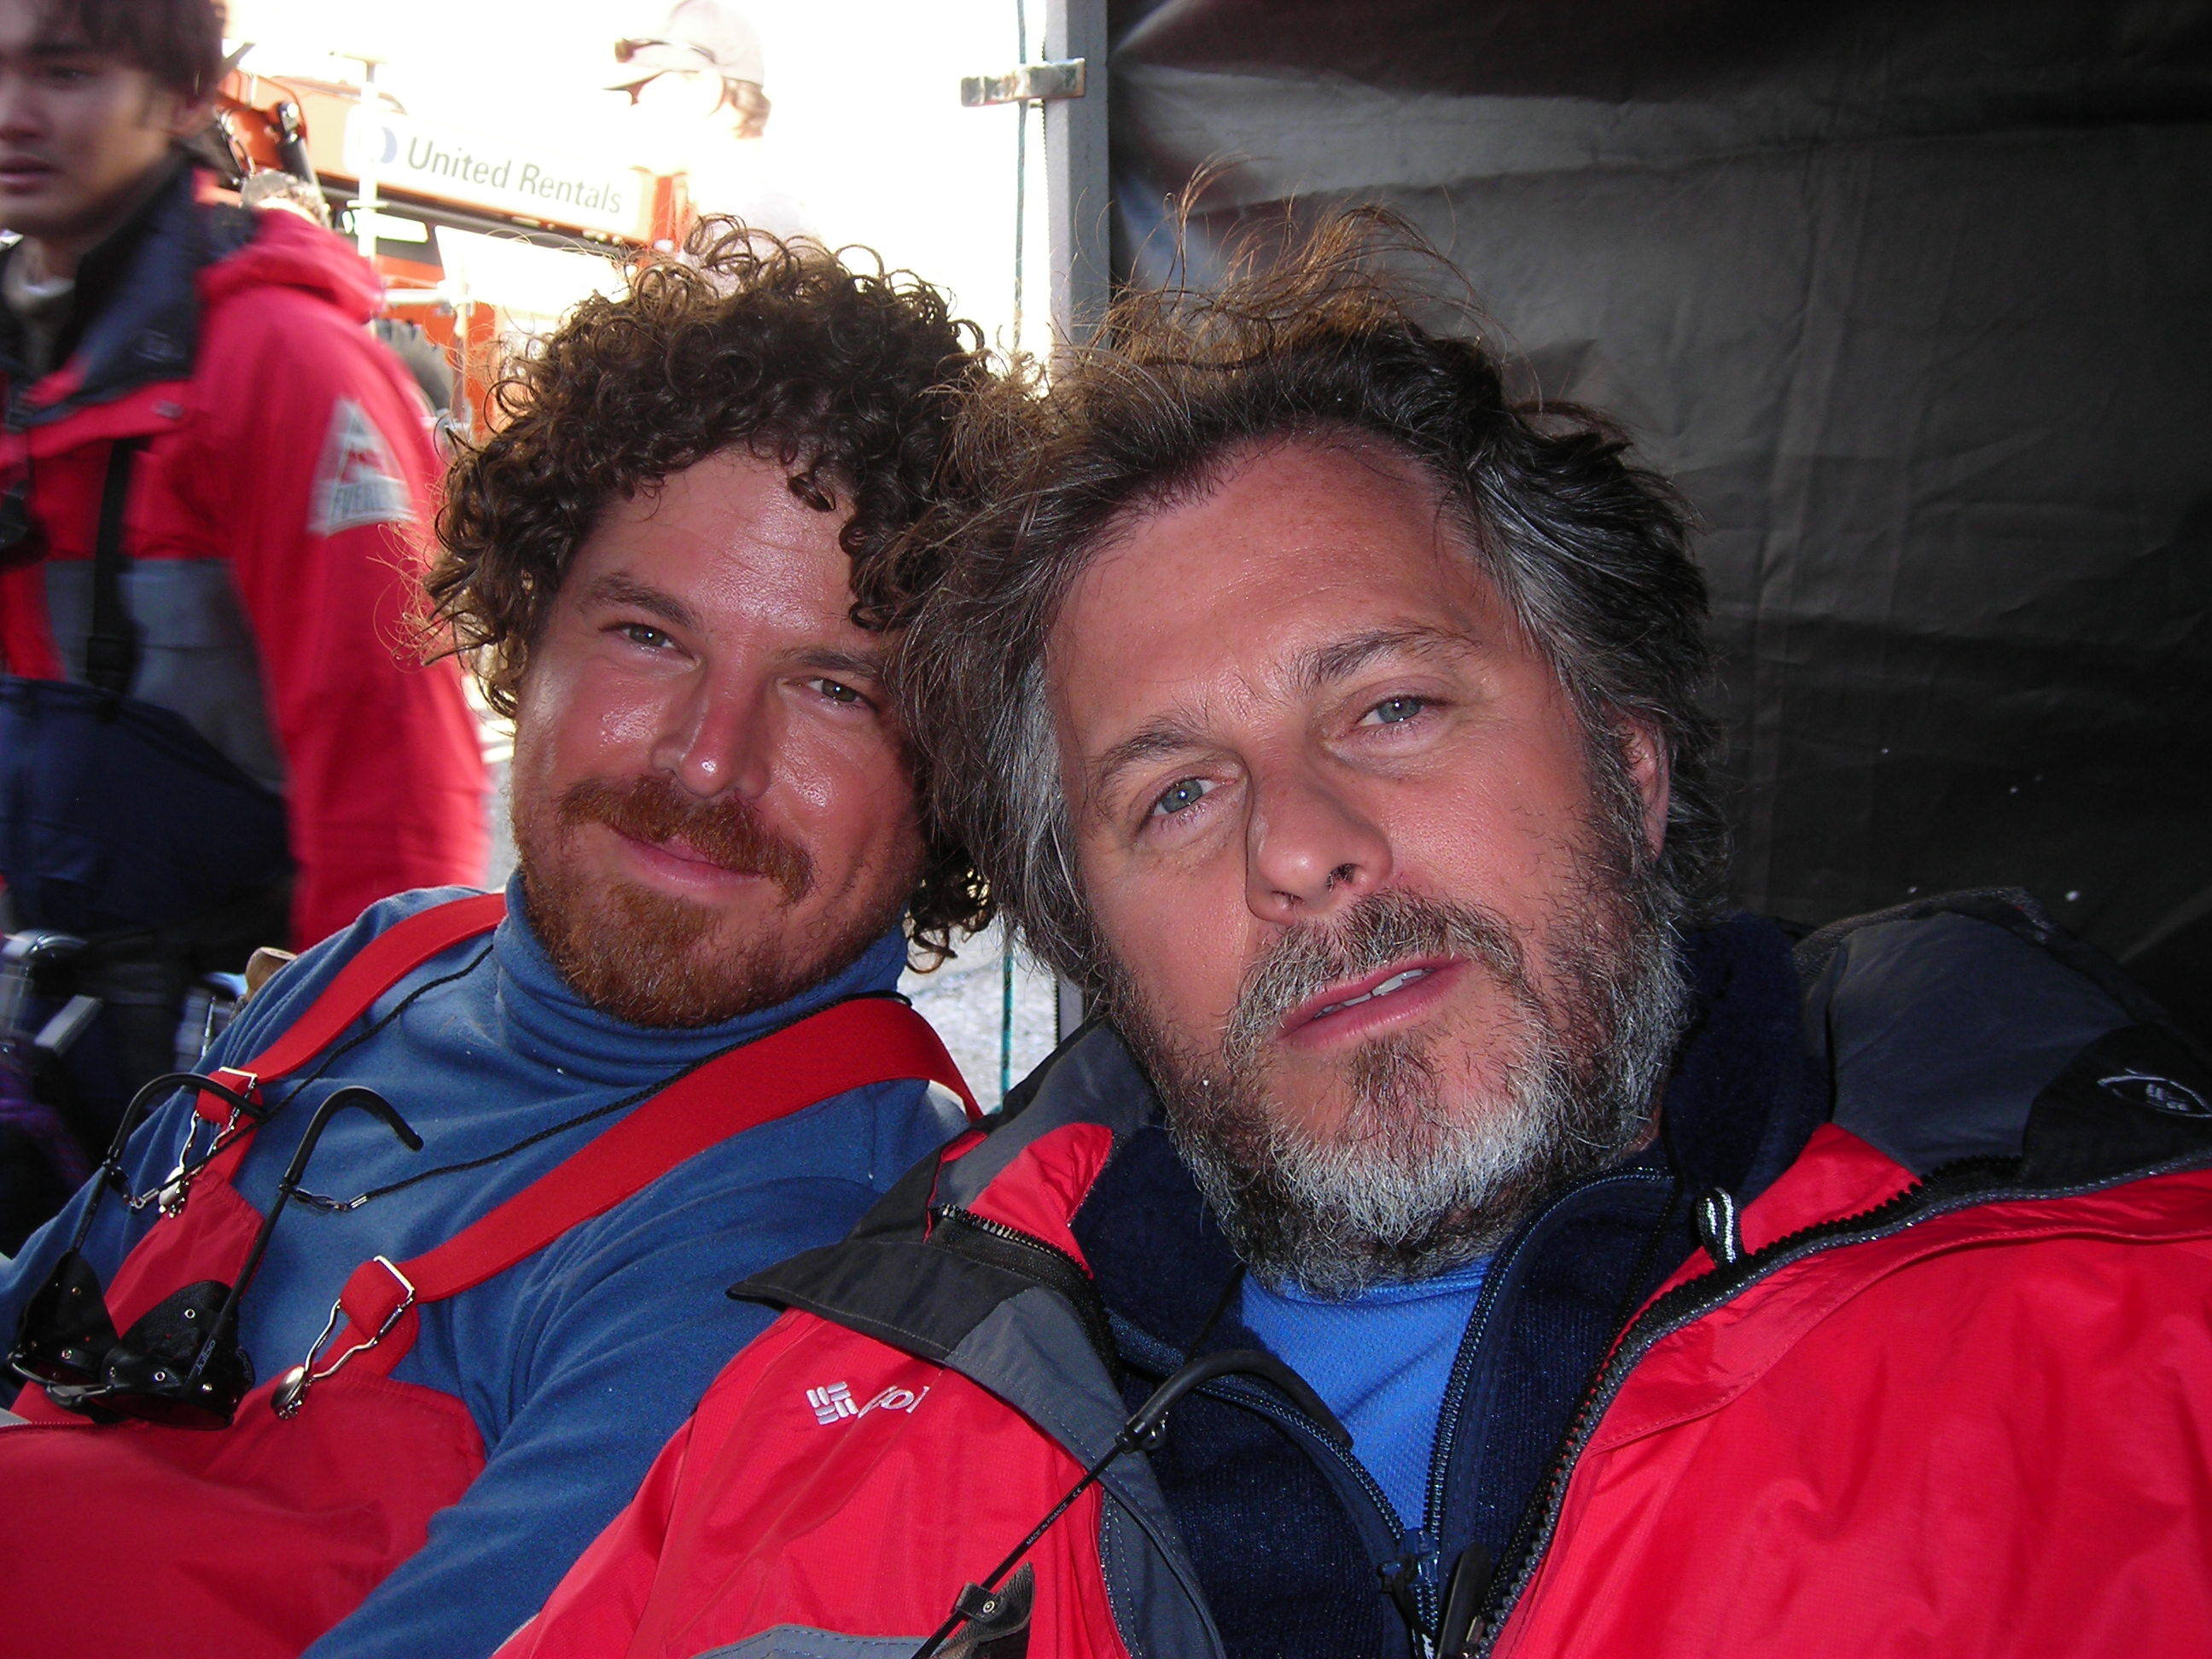 Joe-Norman Shaw (right) with Kevin James on set of the CBC mini-series 